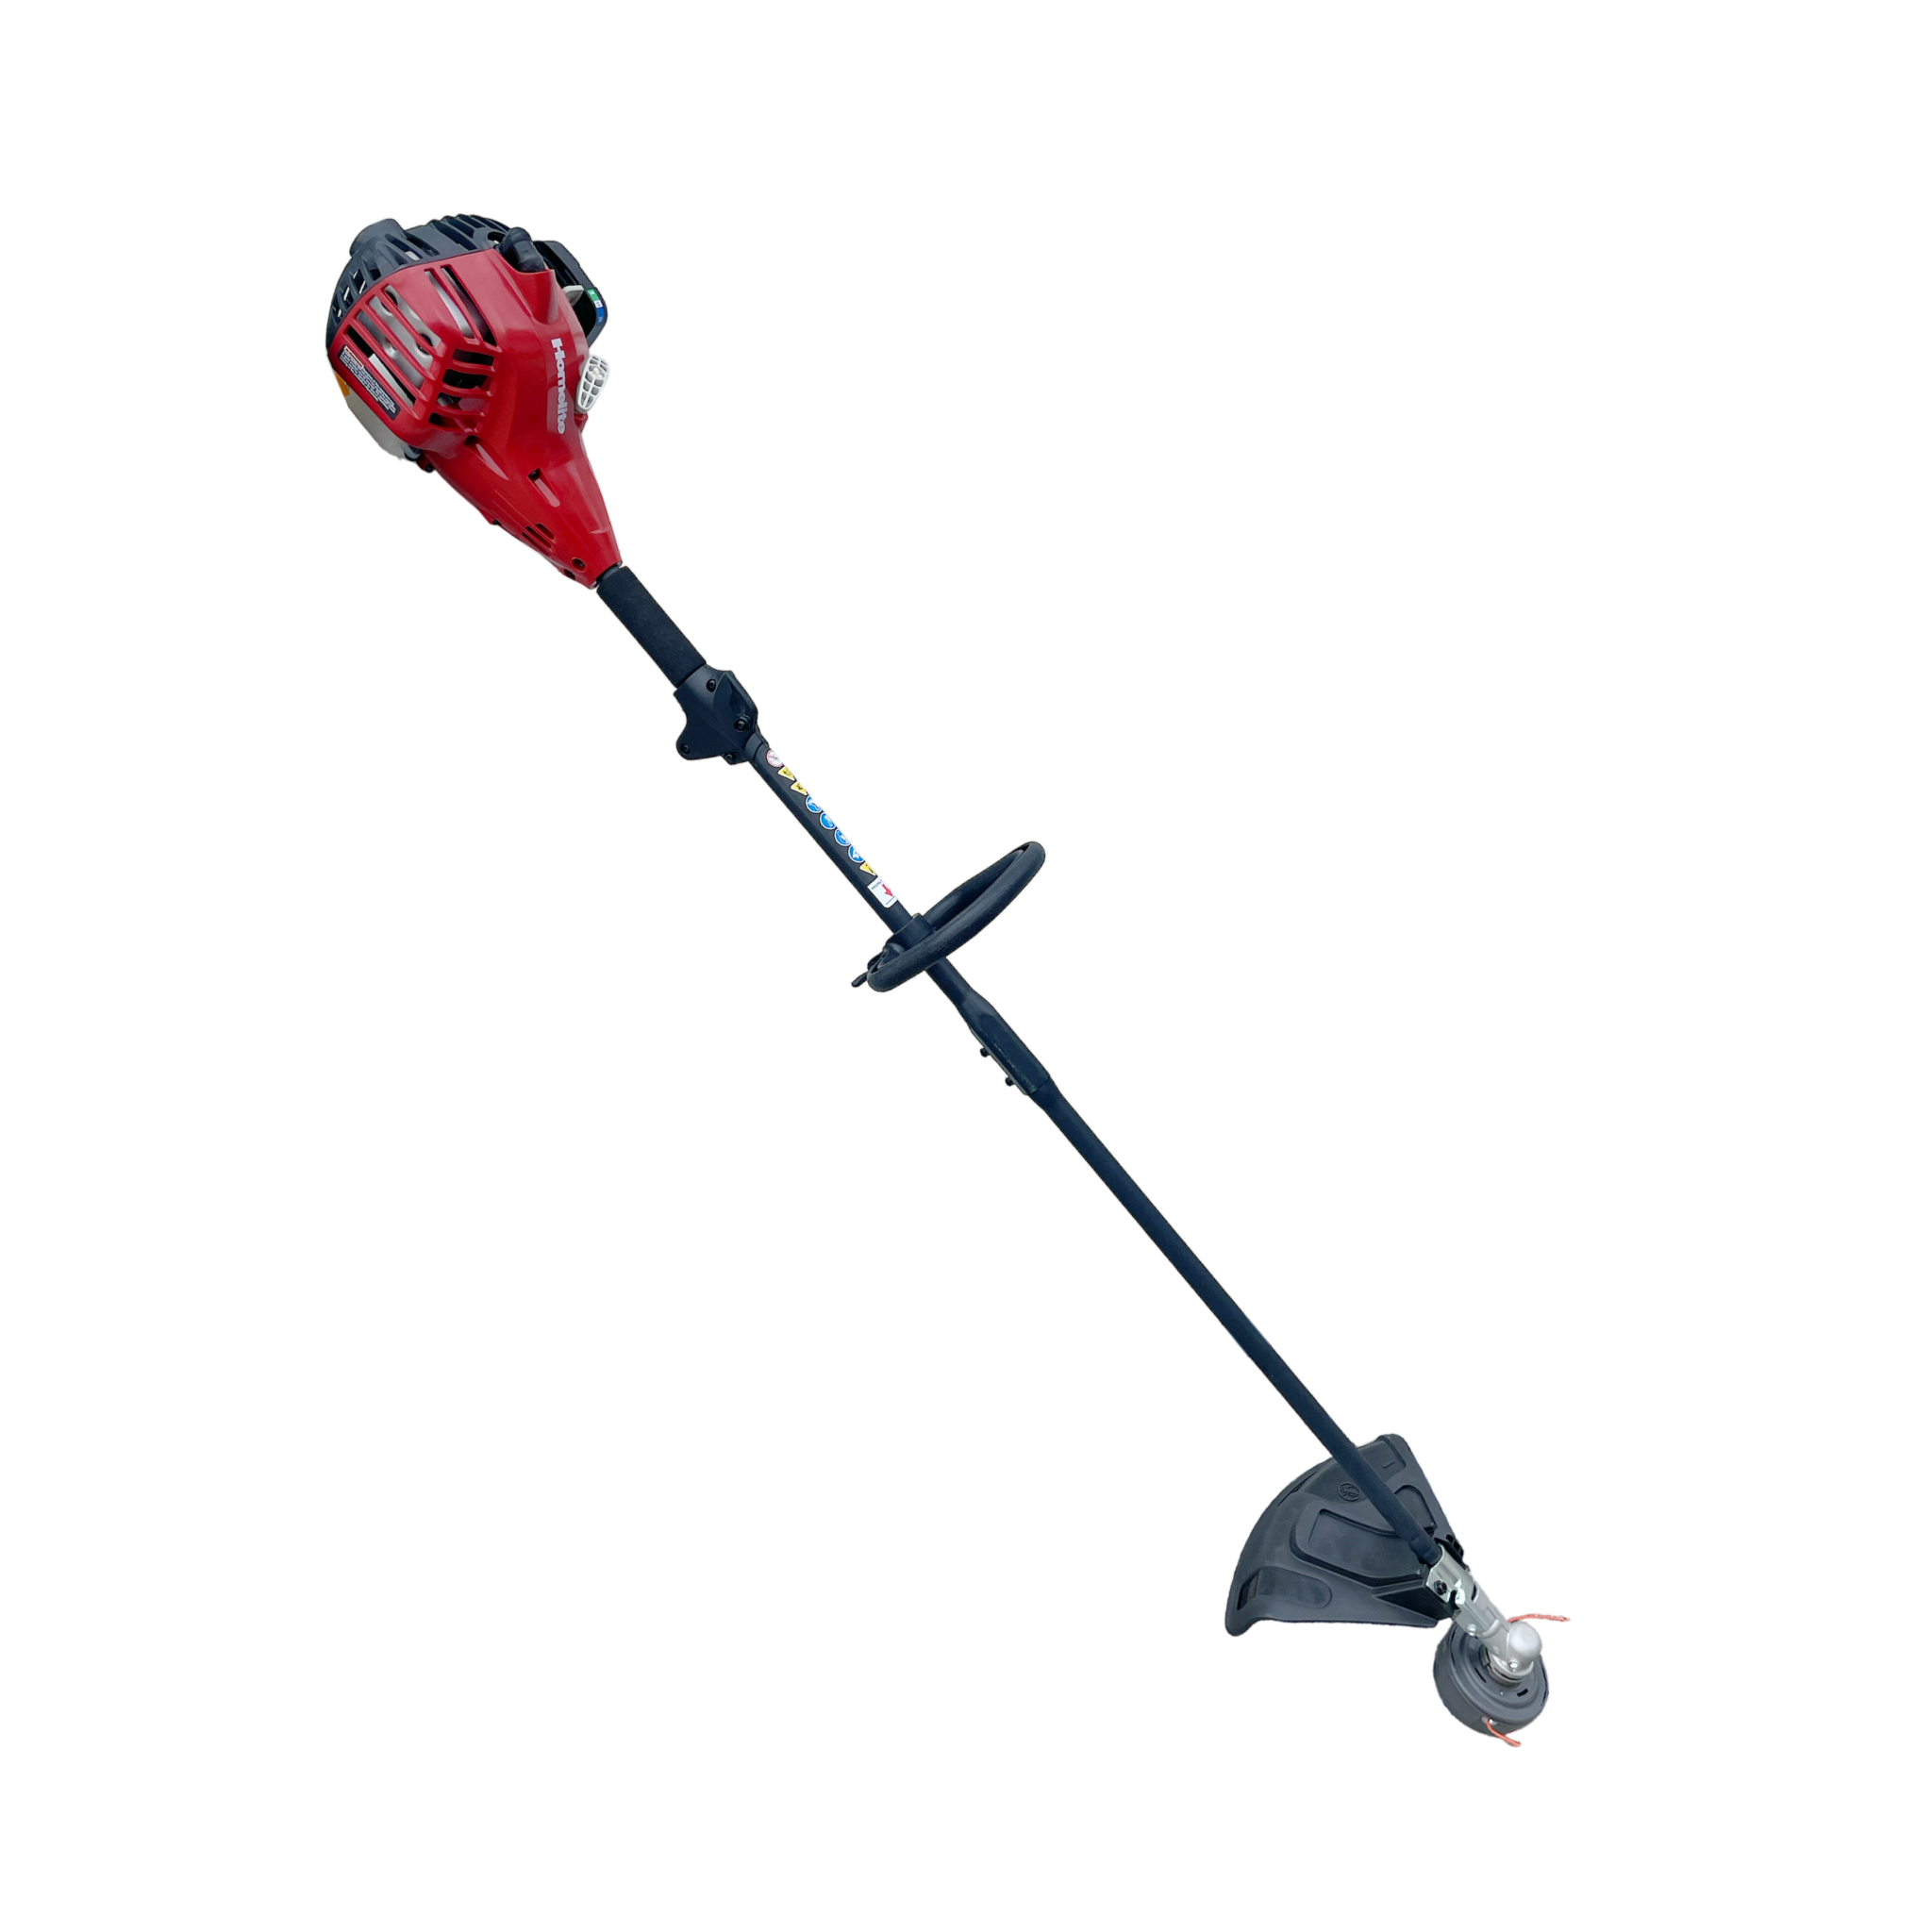 Homelite 2-Cycle 26 CC Straight Shaft Gas Trimmer